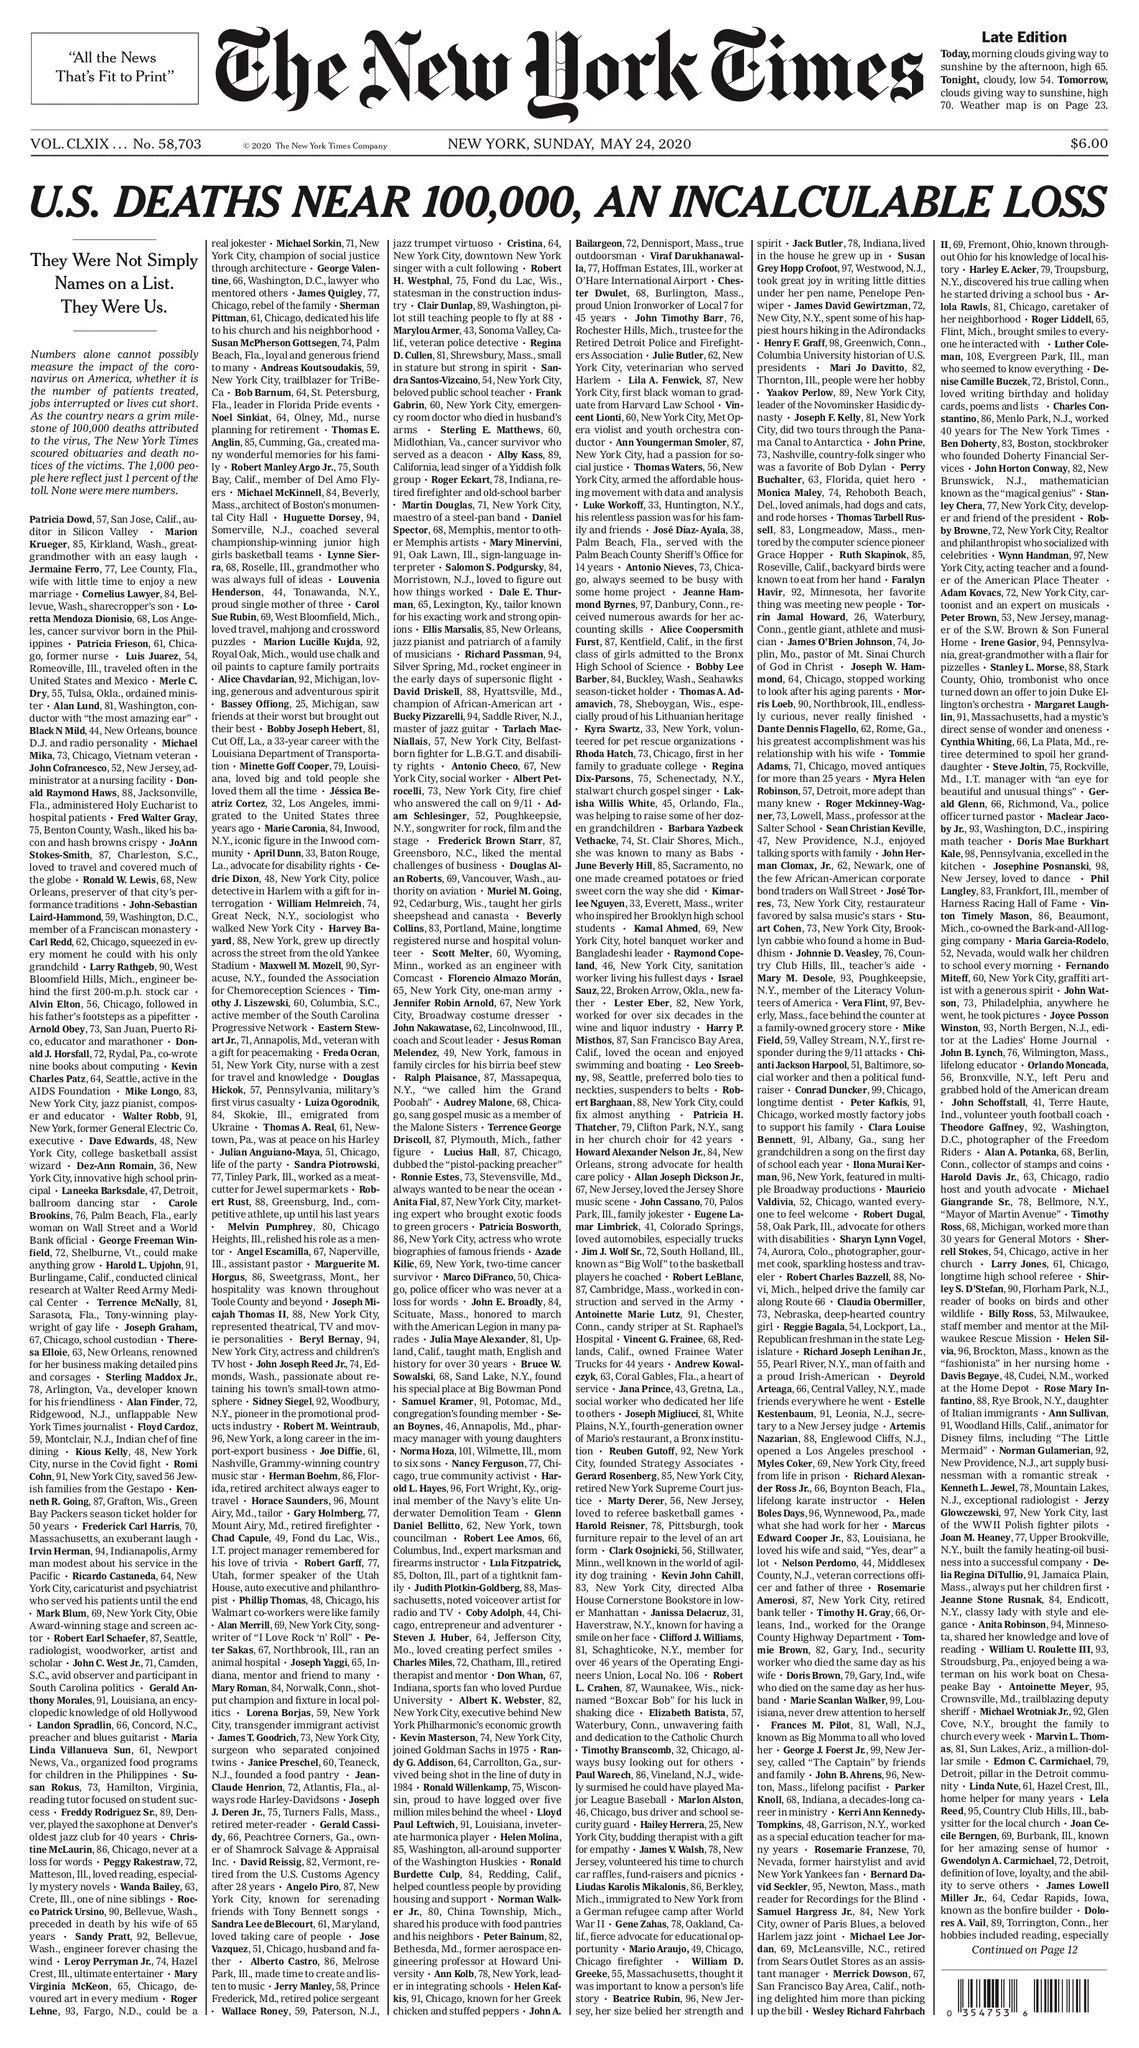 The names of hundreds of people who died from Covid-19 on the front page of the New York Times